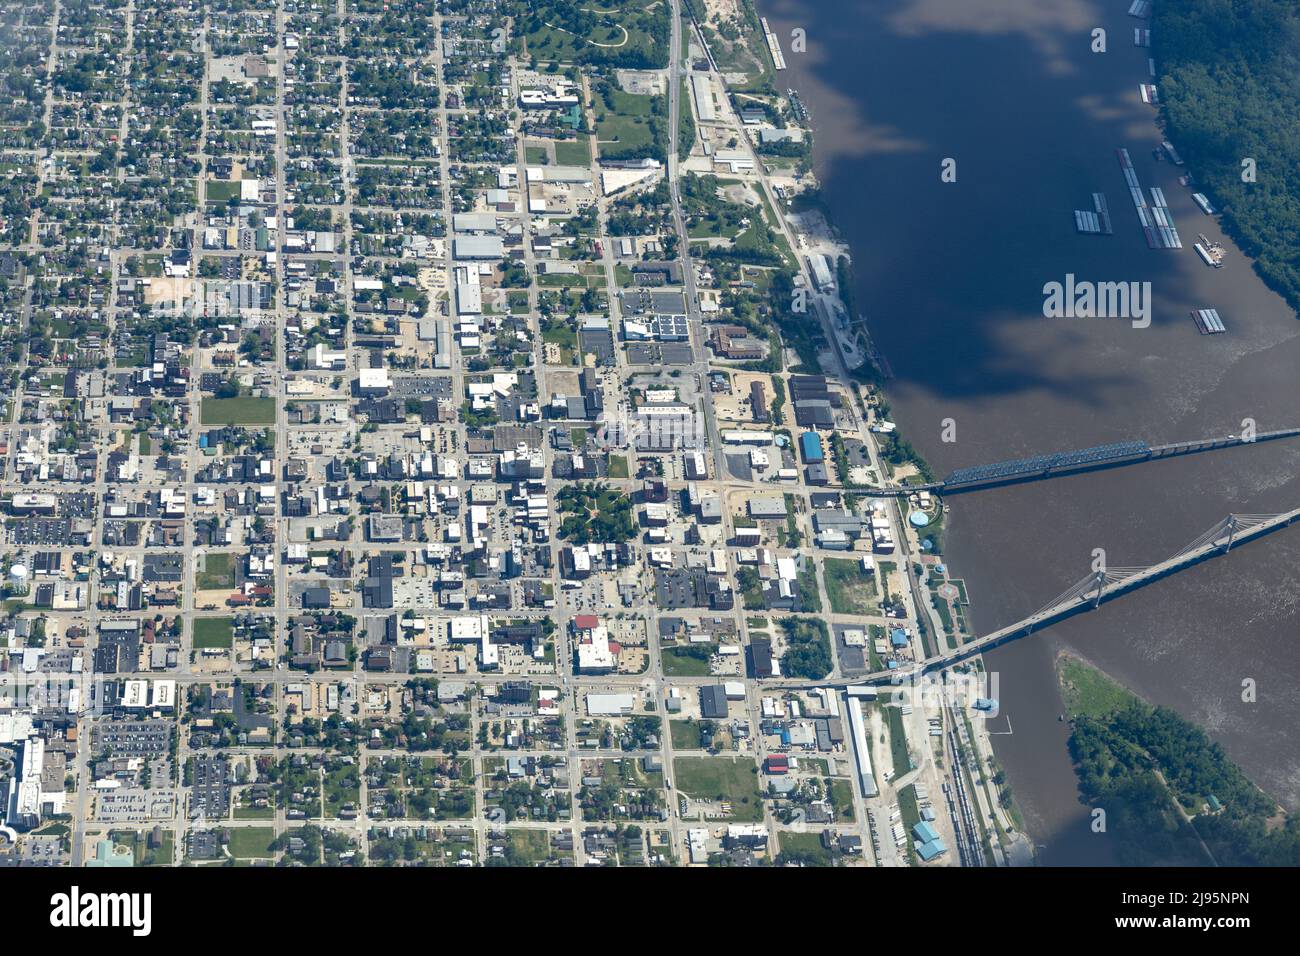 Aerial view of downtown area of Quincy, Illinois, USA Stock Photo